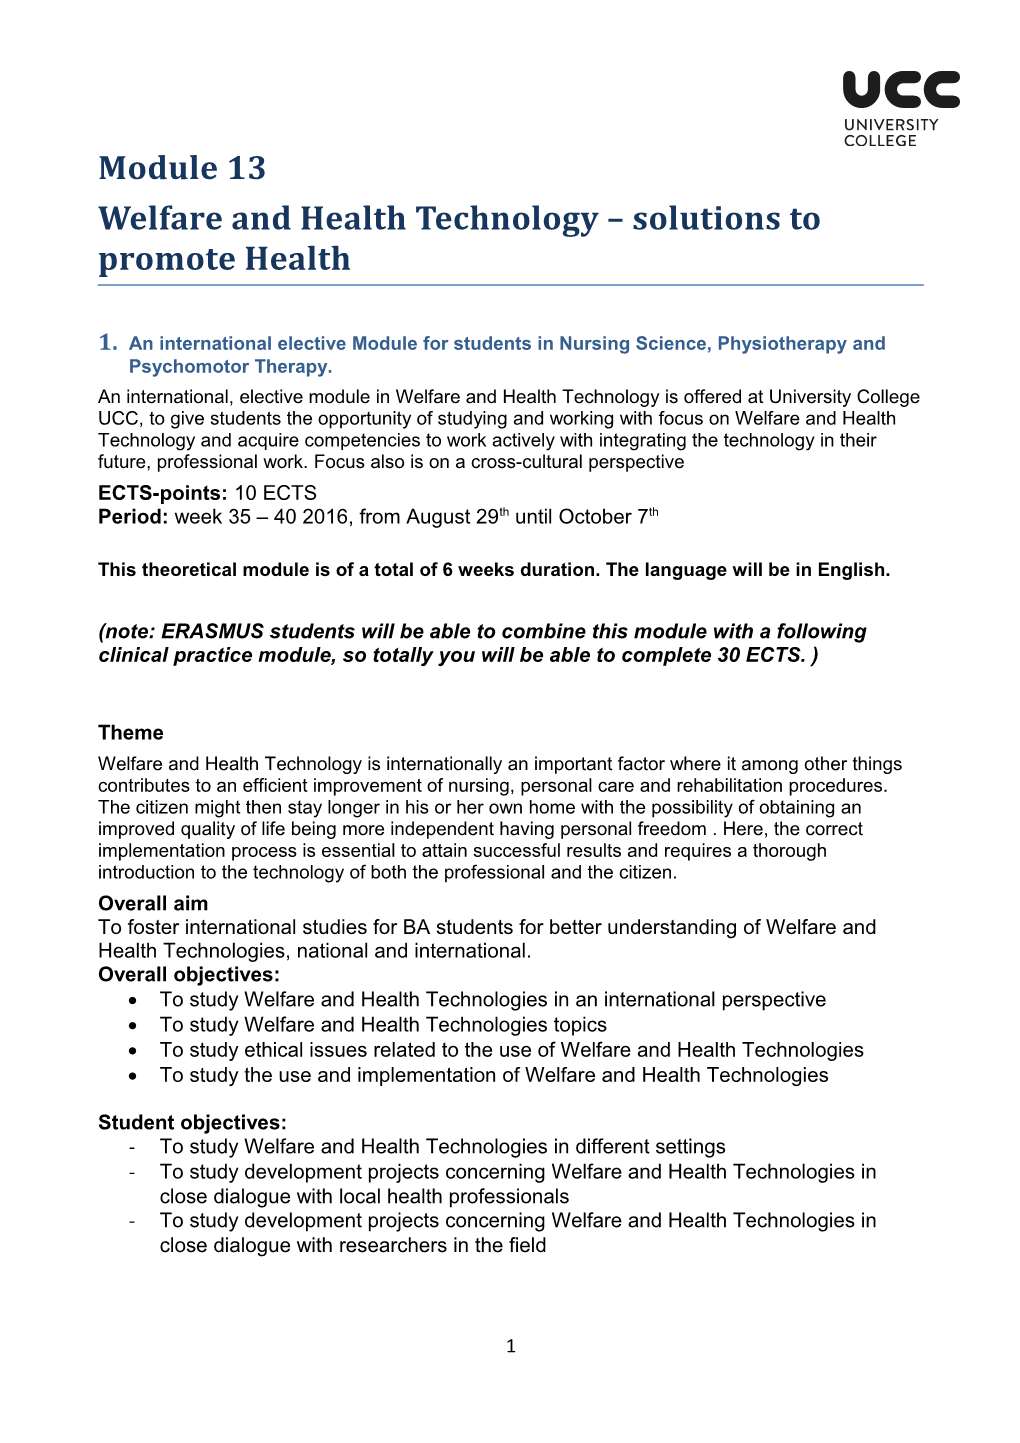 Welfare and Health Technology Solutions to Promote Health